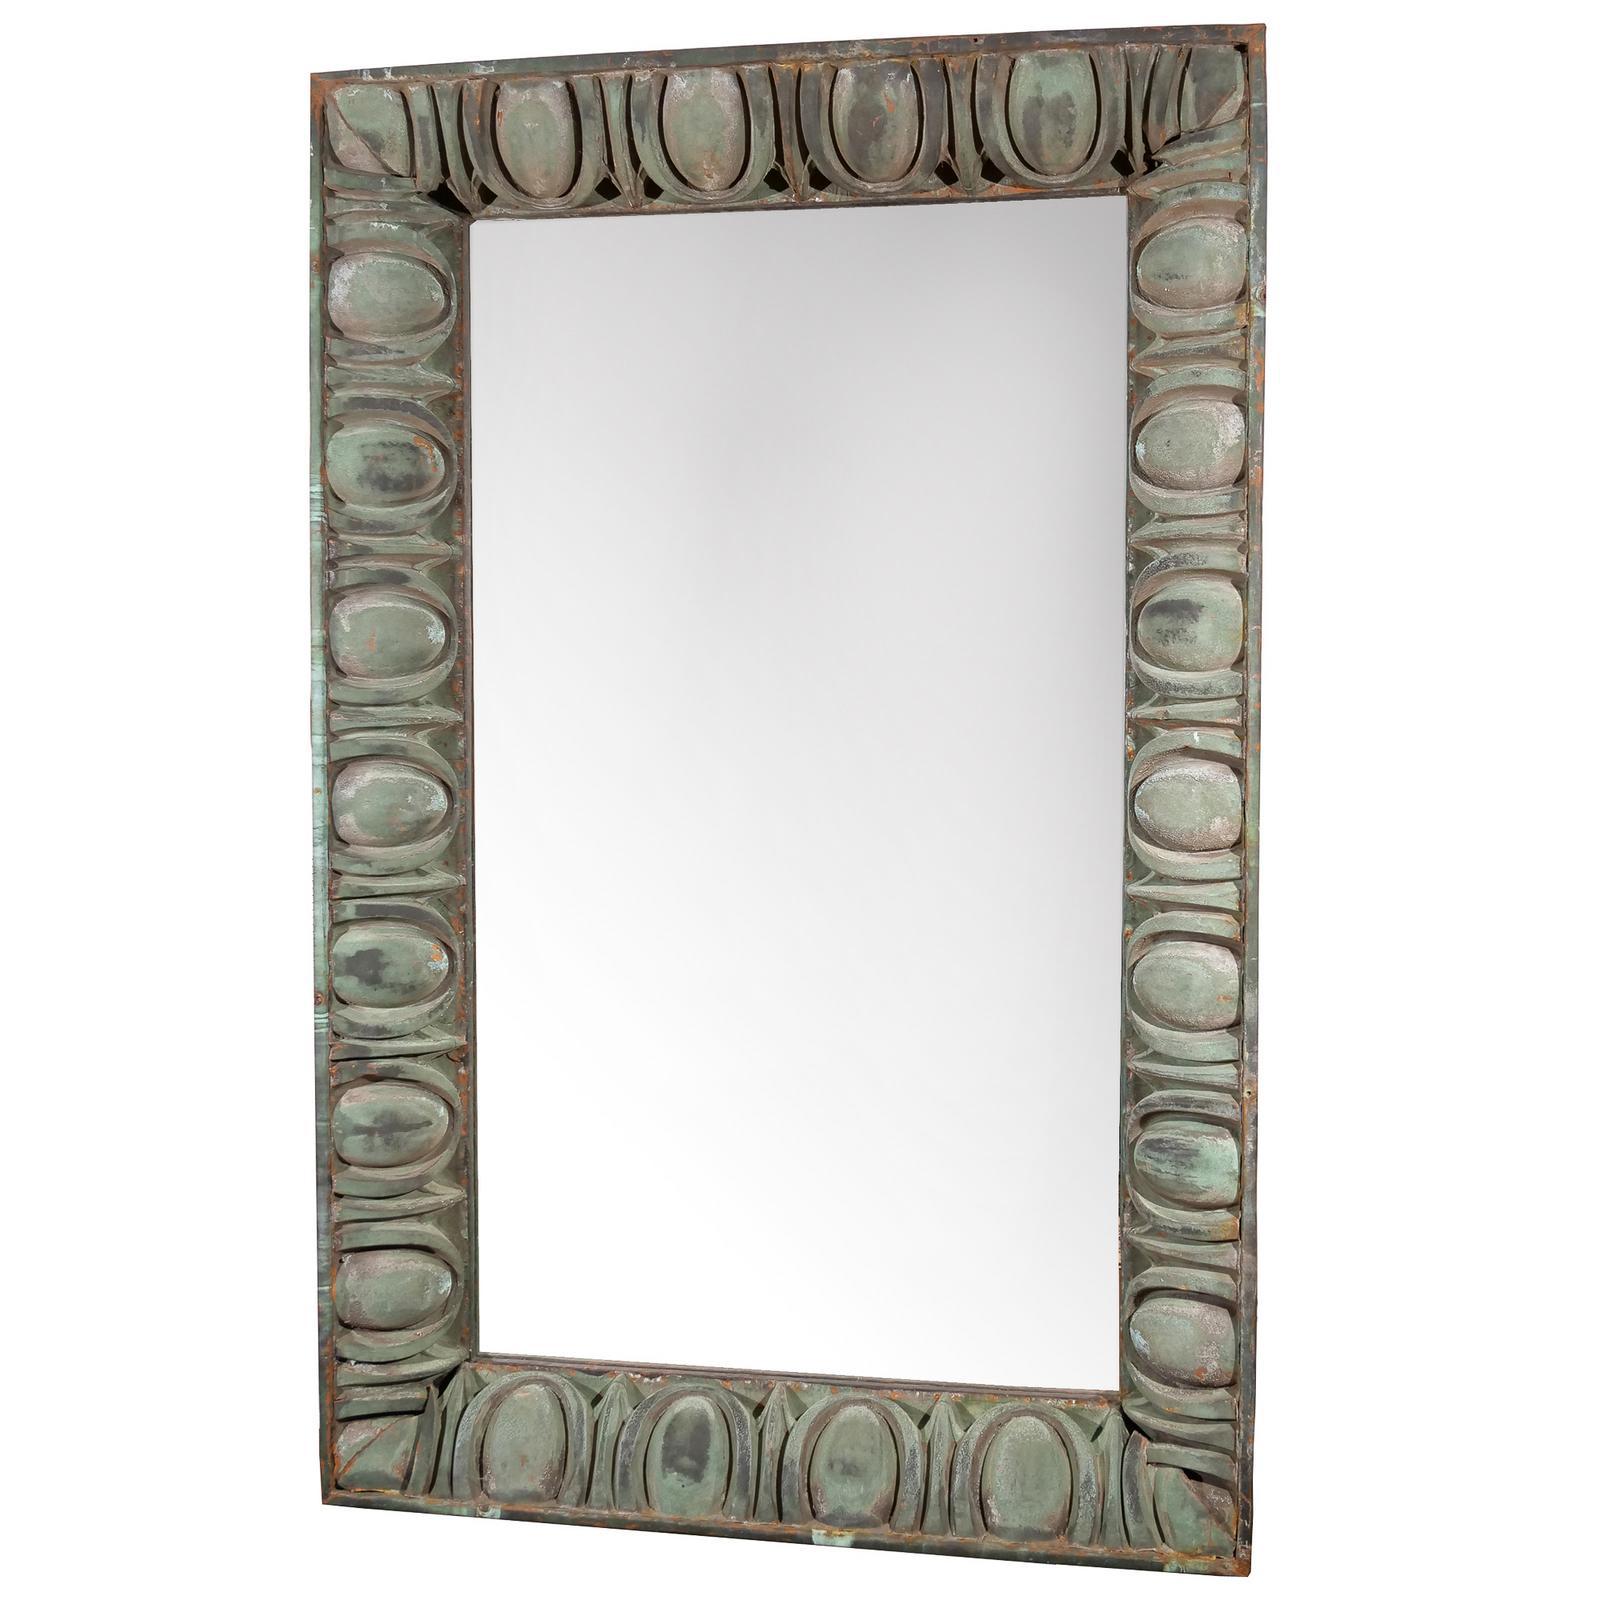 A light-grey, green oversized Art Deco American wall mirror made of hand crafted metal with its original mirror glass, in good condition. The floor mirror belong to the Rialto Theater, enhanced with egg-and-dart patterned copper border, designed and